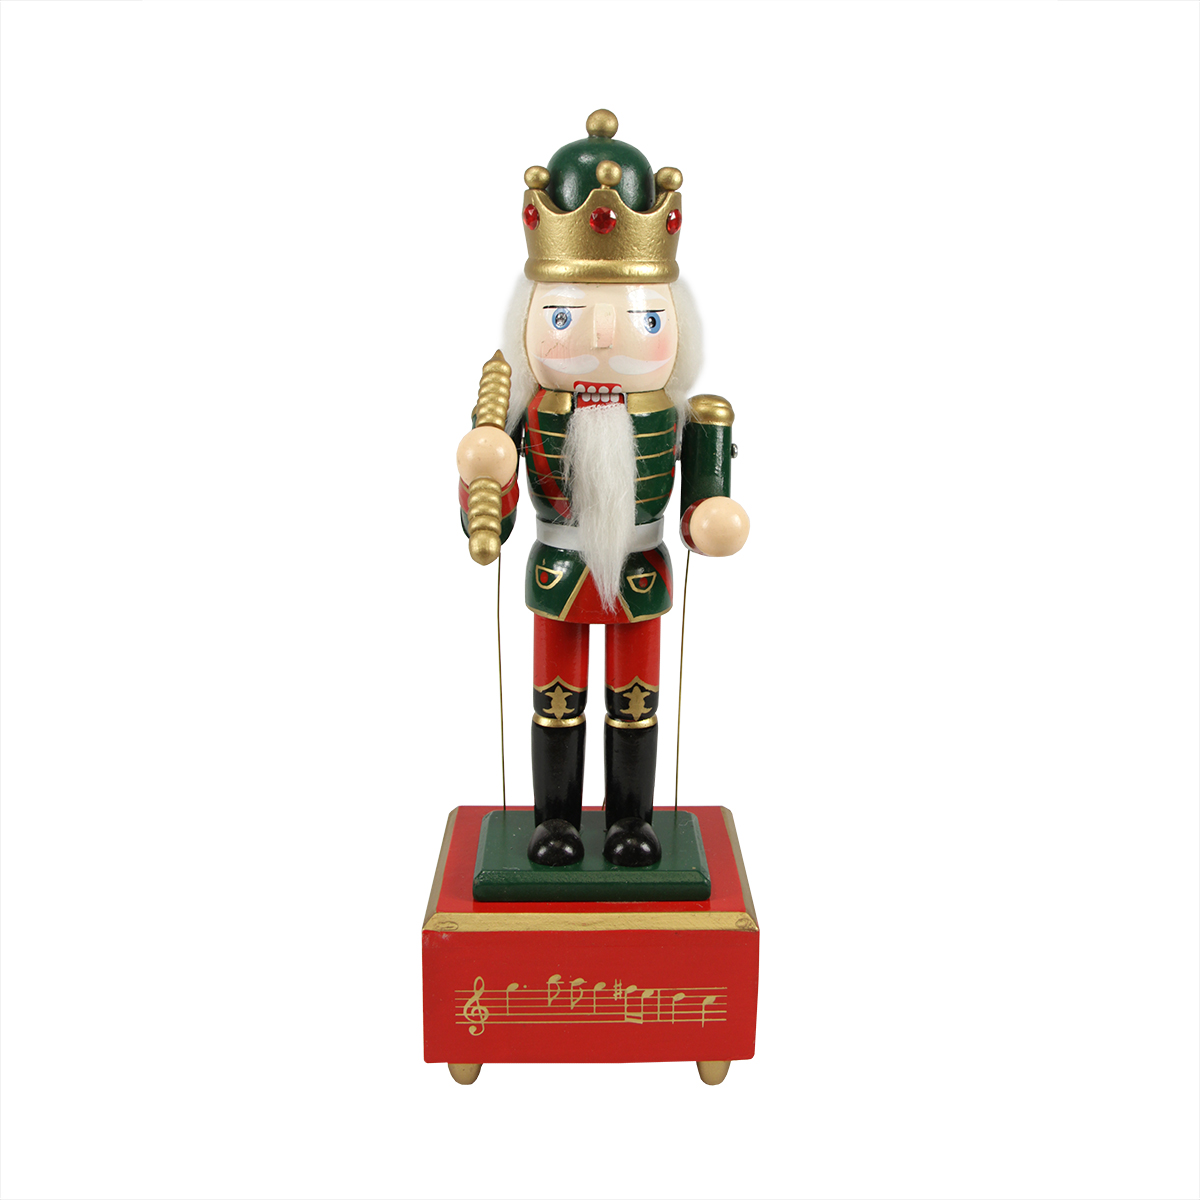 Nutcracker Factory 12" Red and Green Animated King with Scepter Christmas Nutcracker